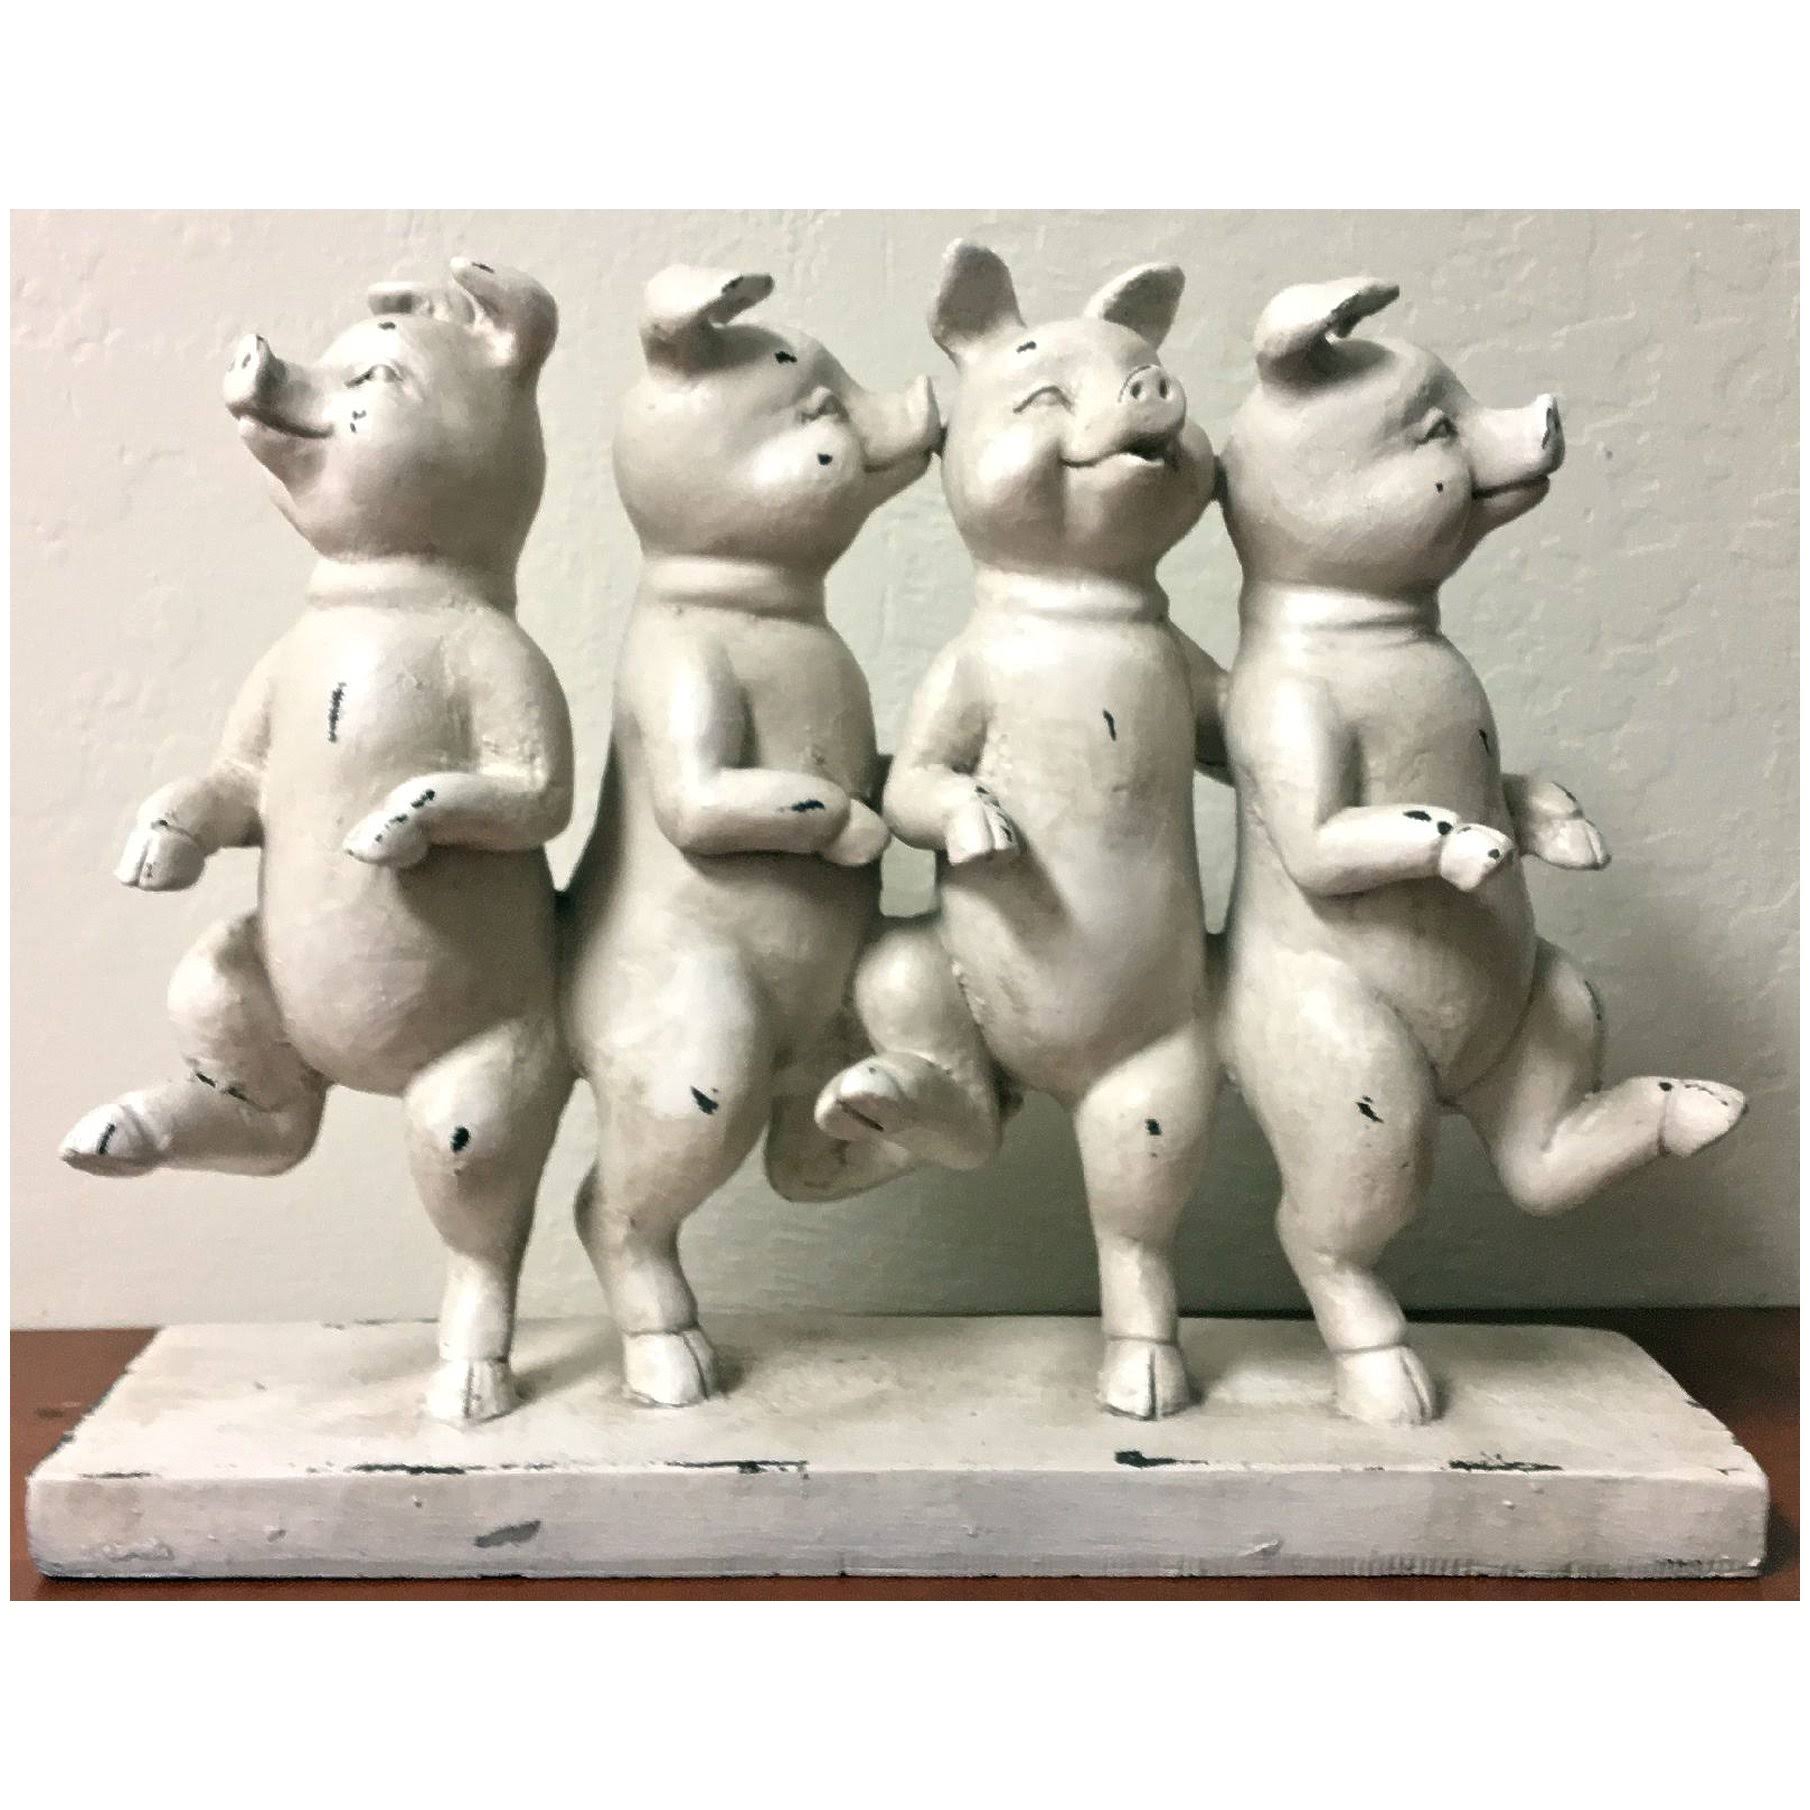 Darice Four Pigs Dancing Table Top Figurine Vintage Aged White Antique Look Decoration 30044574